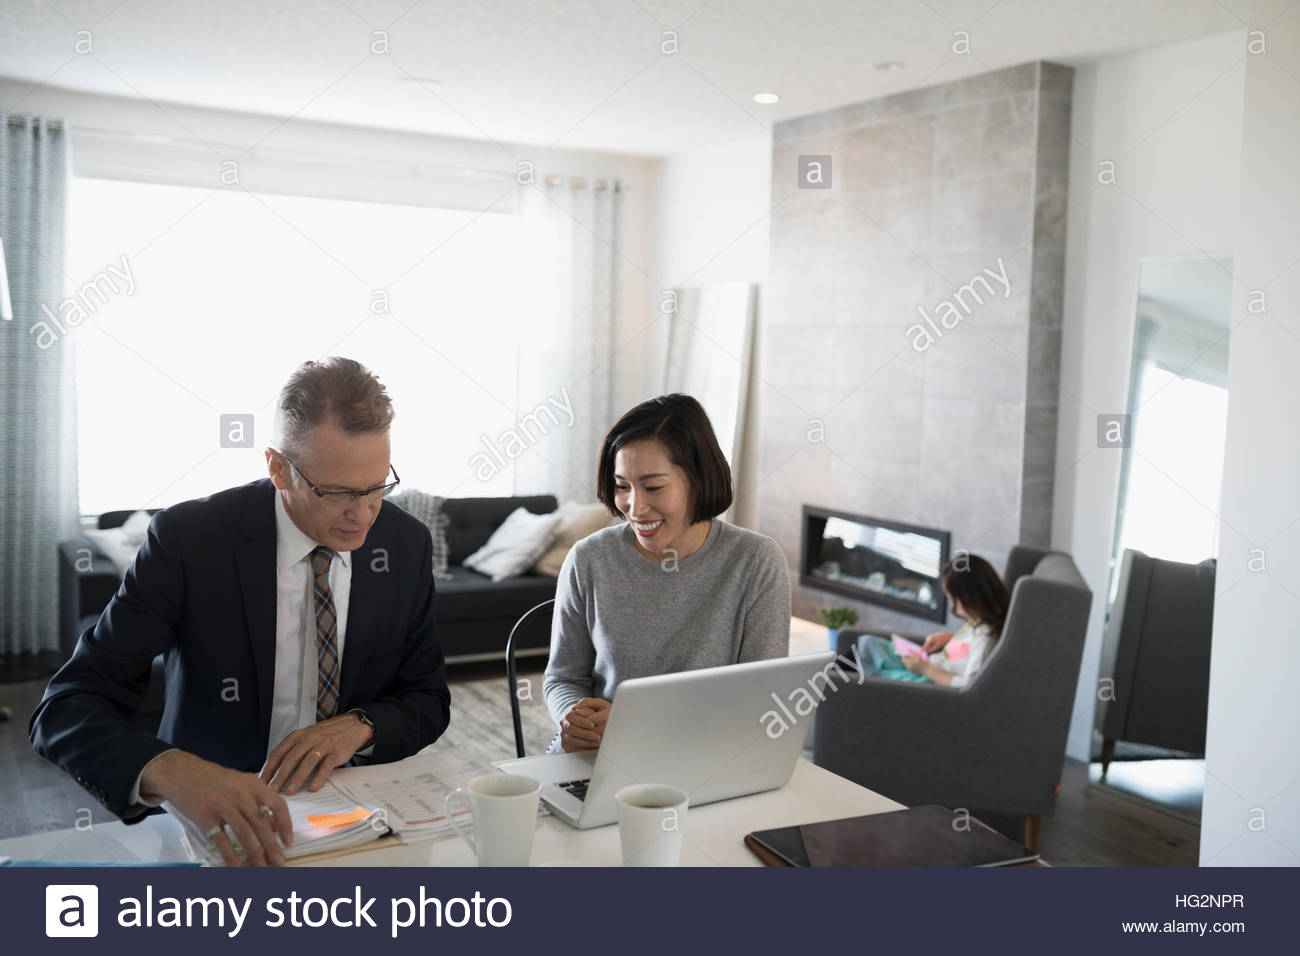 Financial advisor and woman with laptop meeting in dining room Stock Photo